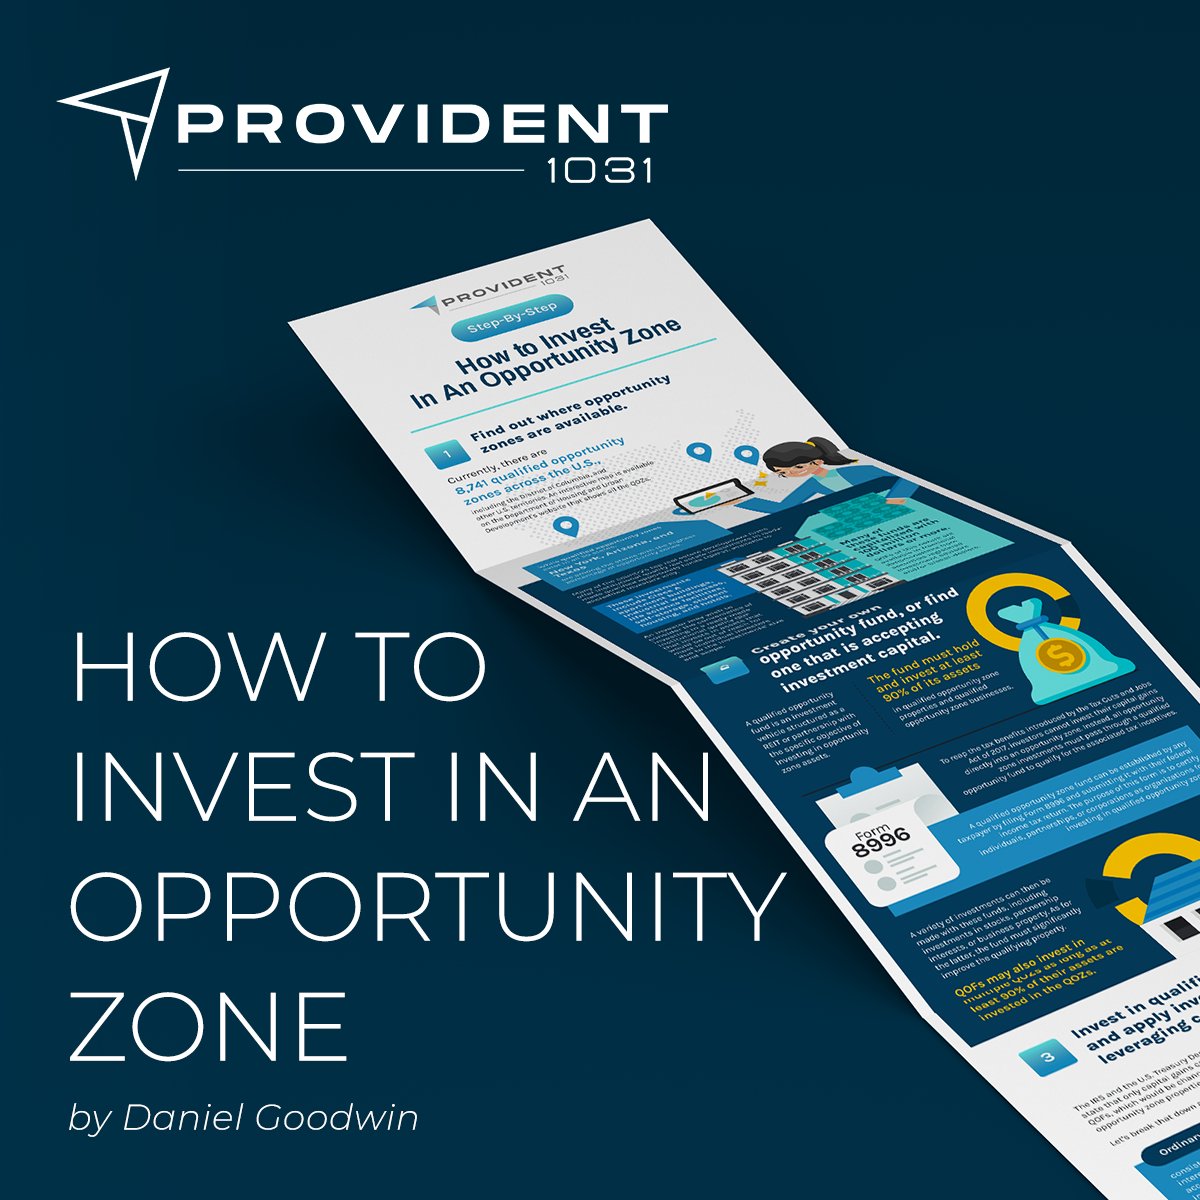 FREE Infographic: How To Invest In An Opportunity Zone - Step-By-Step - bit.ly/3pGEczc

#QOZ #QualifiedOpportunityZone #1031Exchange #OpportunityZones #InvestmentStrategies #Provident1031 #DanielGoodwin #WealthStrategies #QOZInvesting #OZ